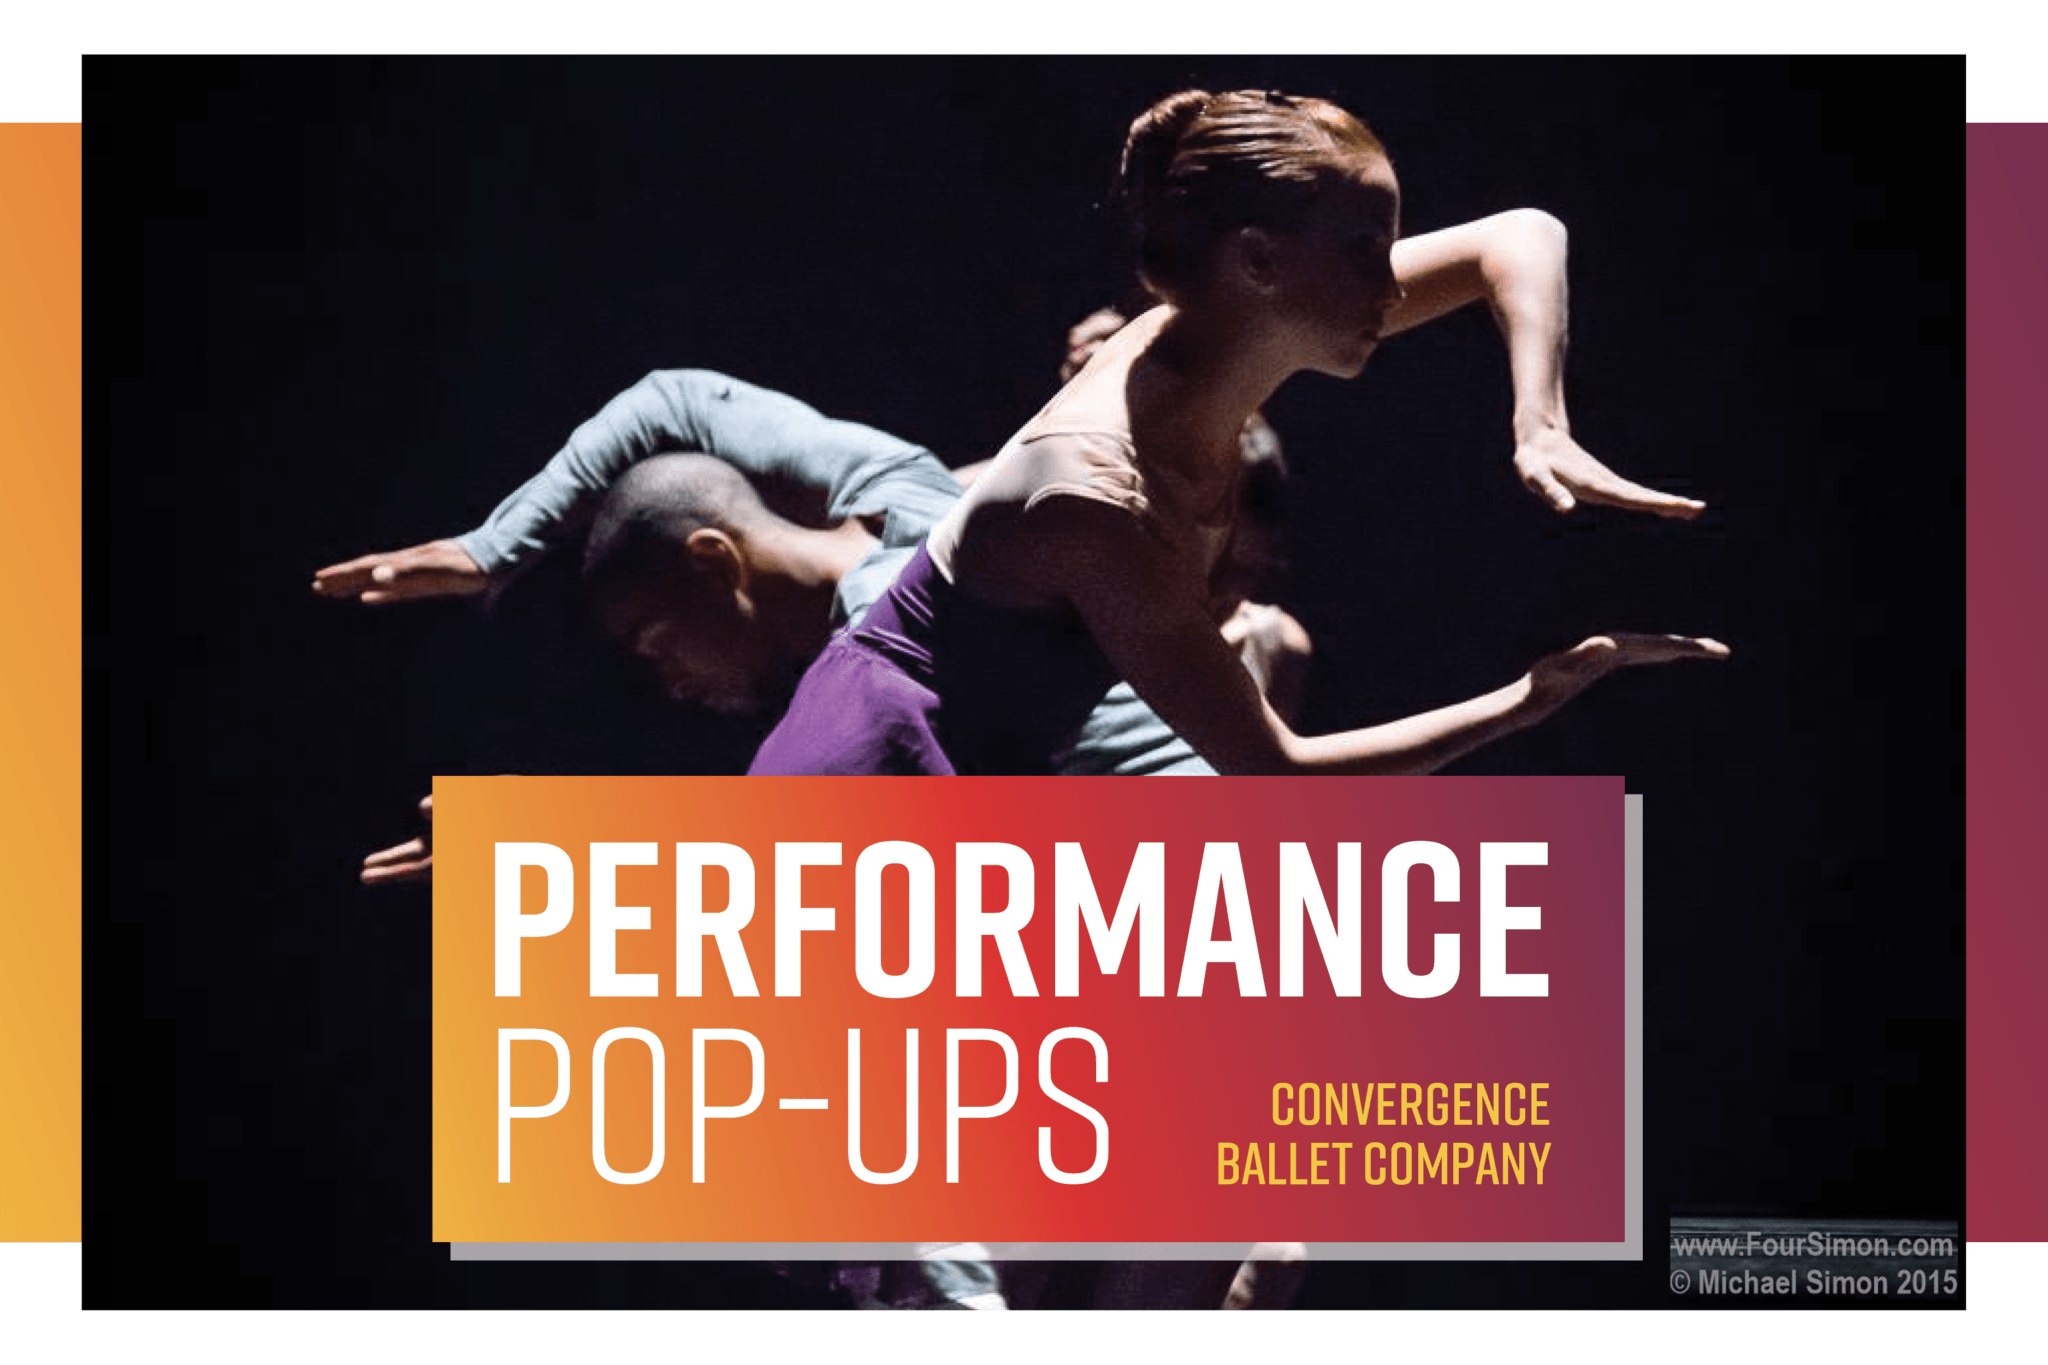 Performance Pop-Up: Convergence Ballet Company Poster Image